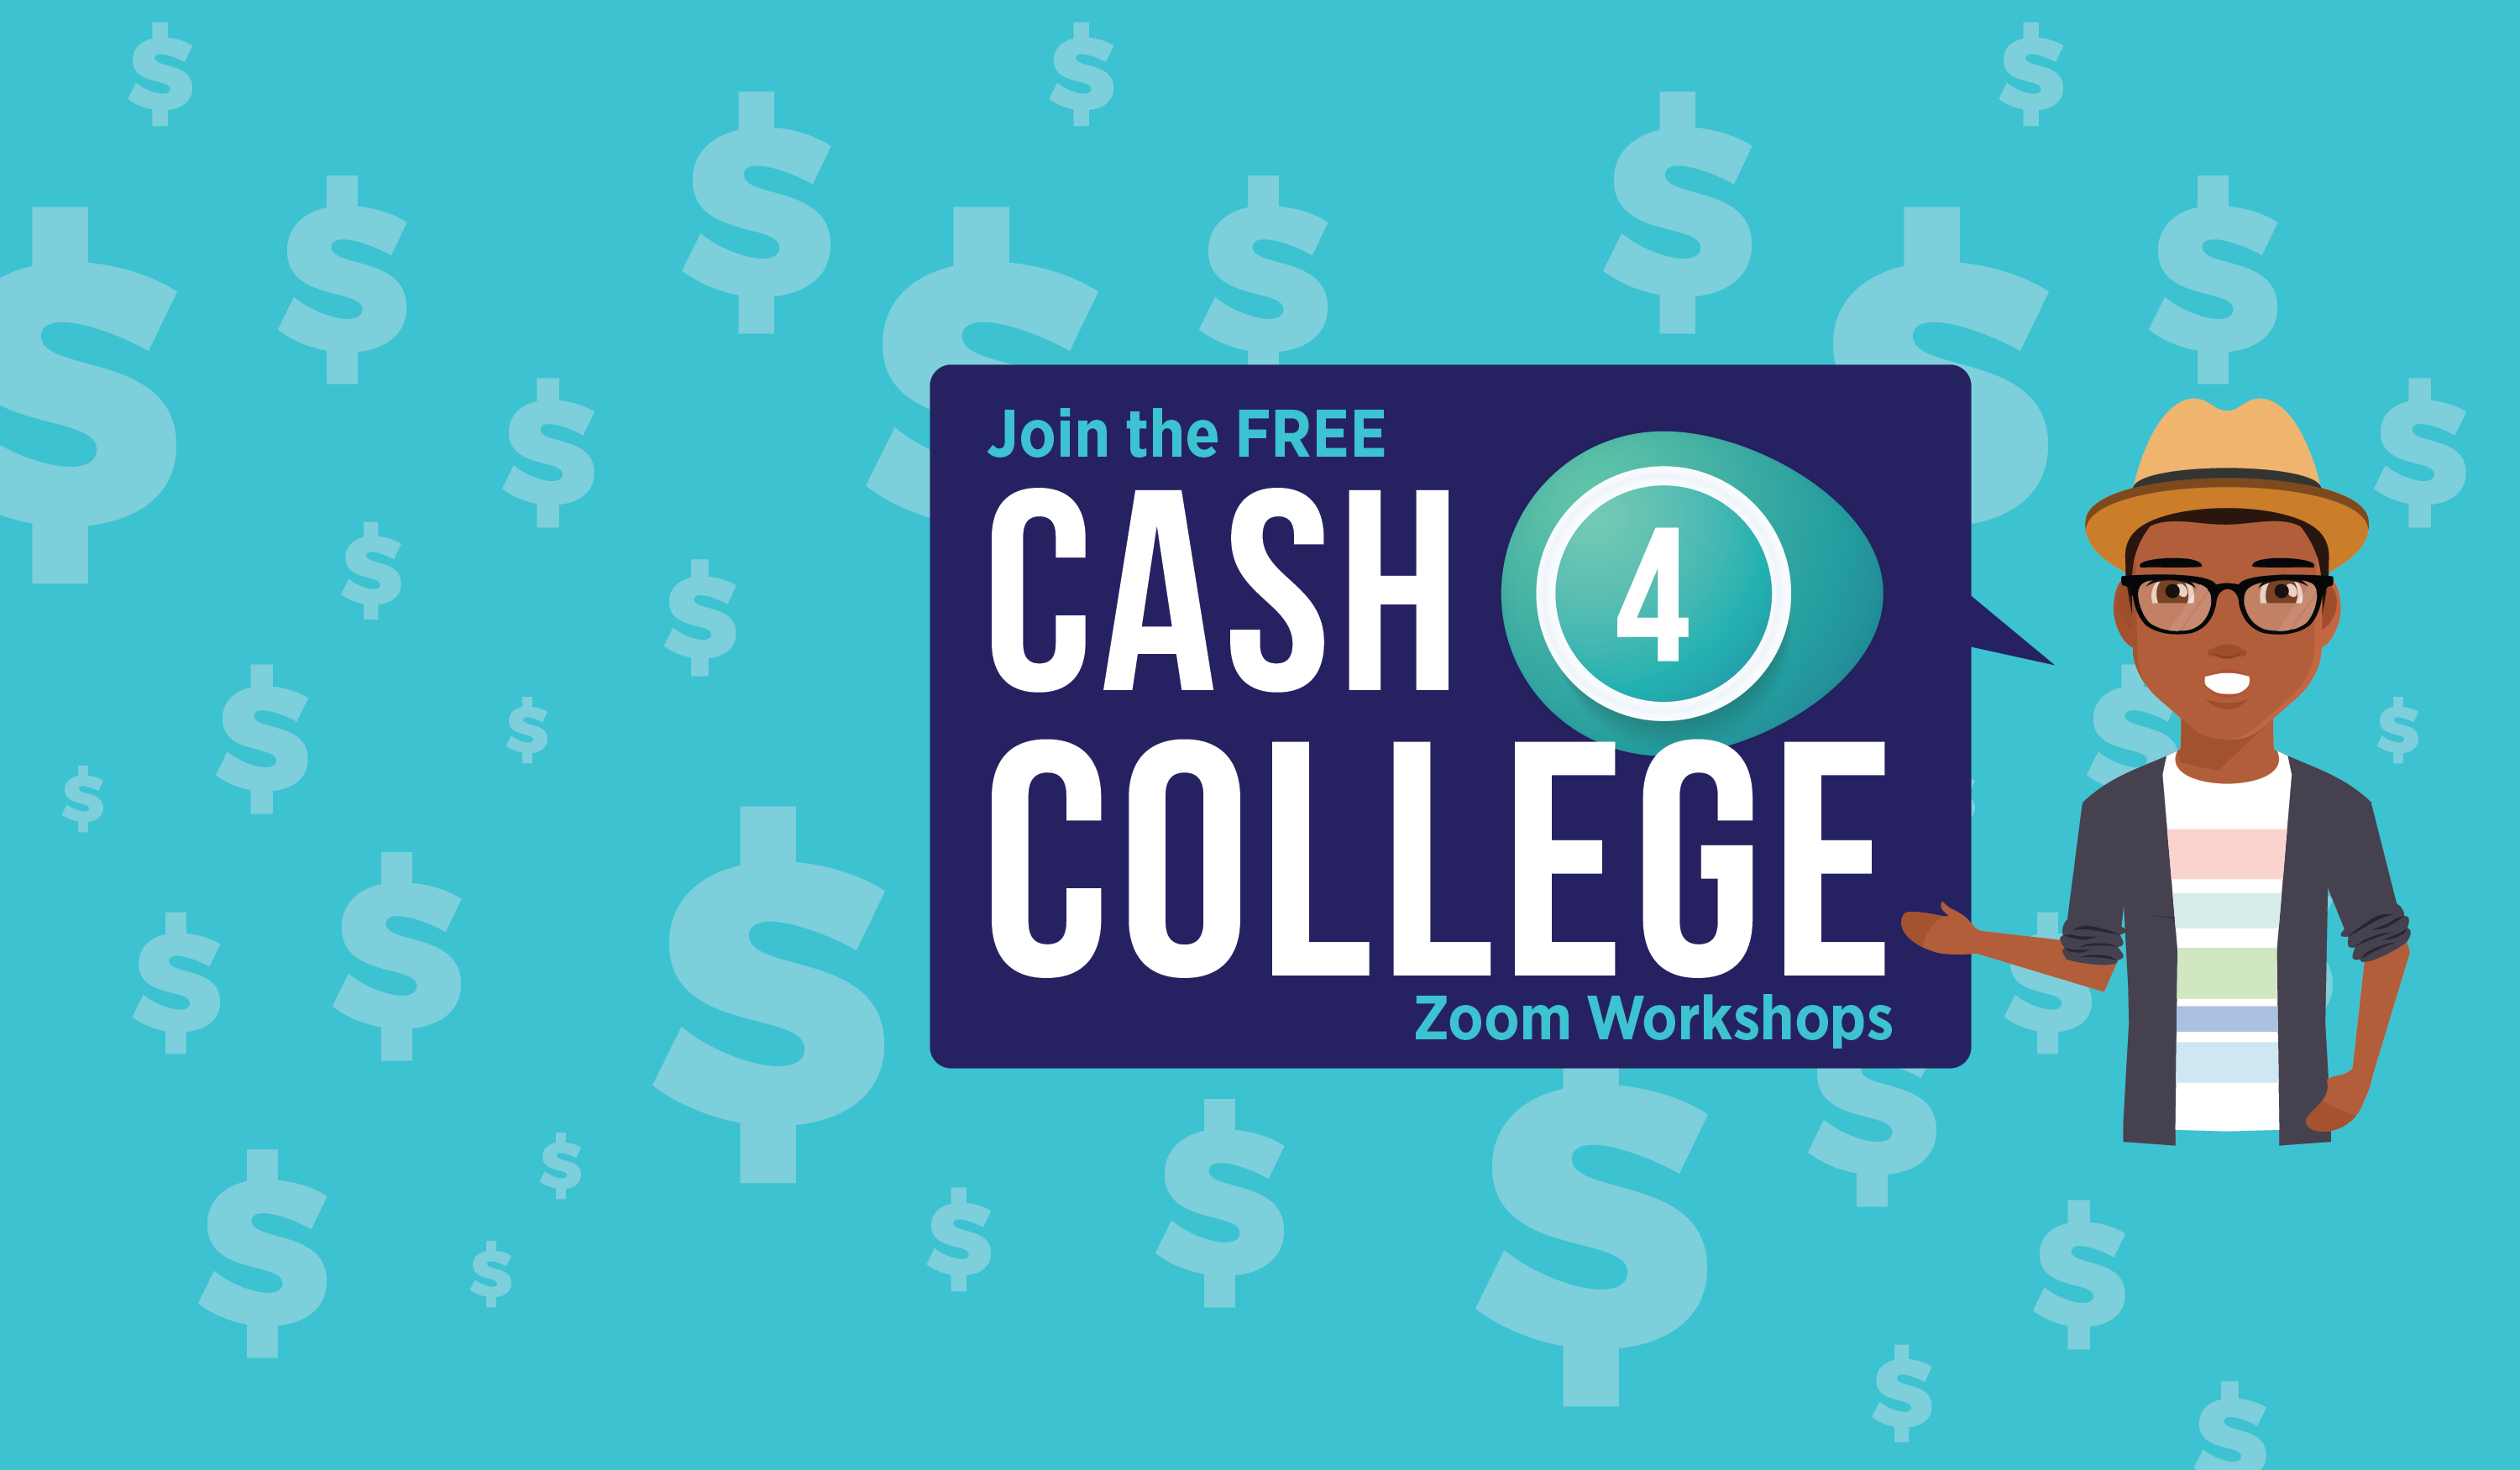 Join the Free Cash 4 College Zoom Workshops